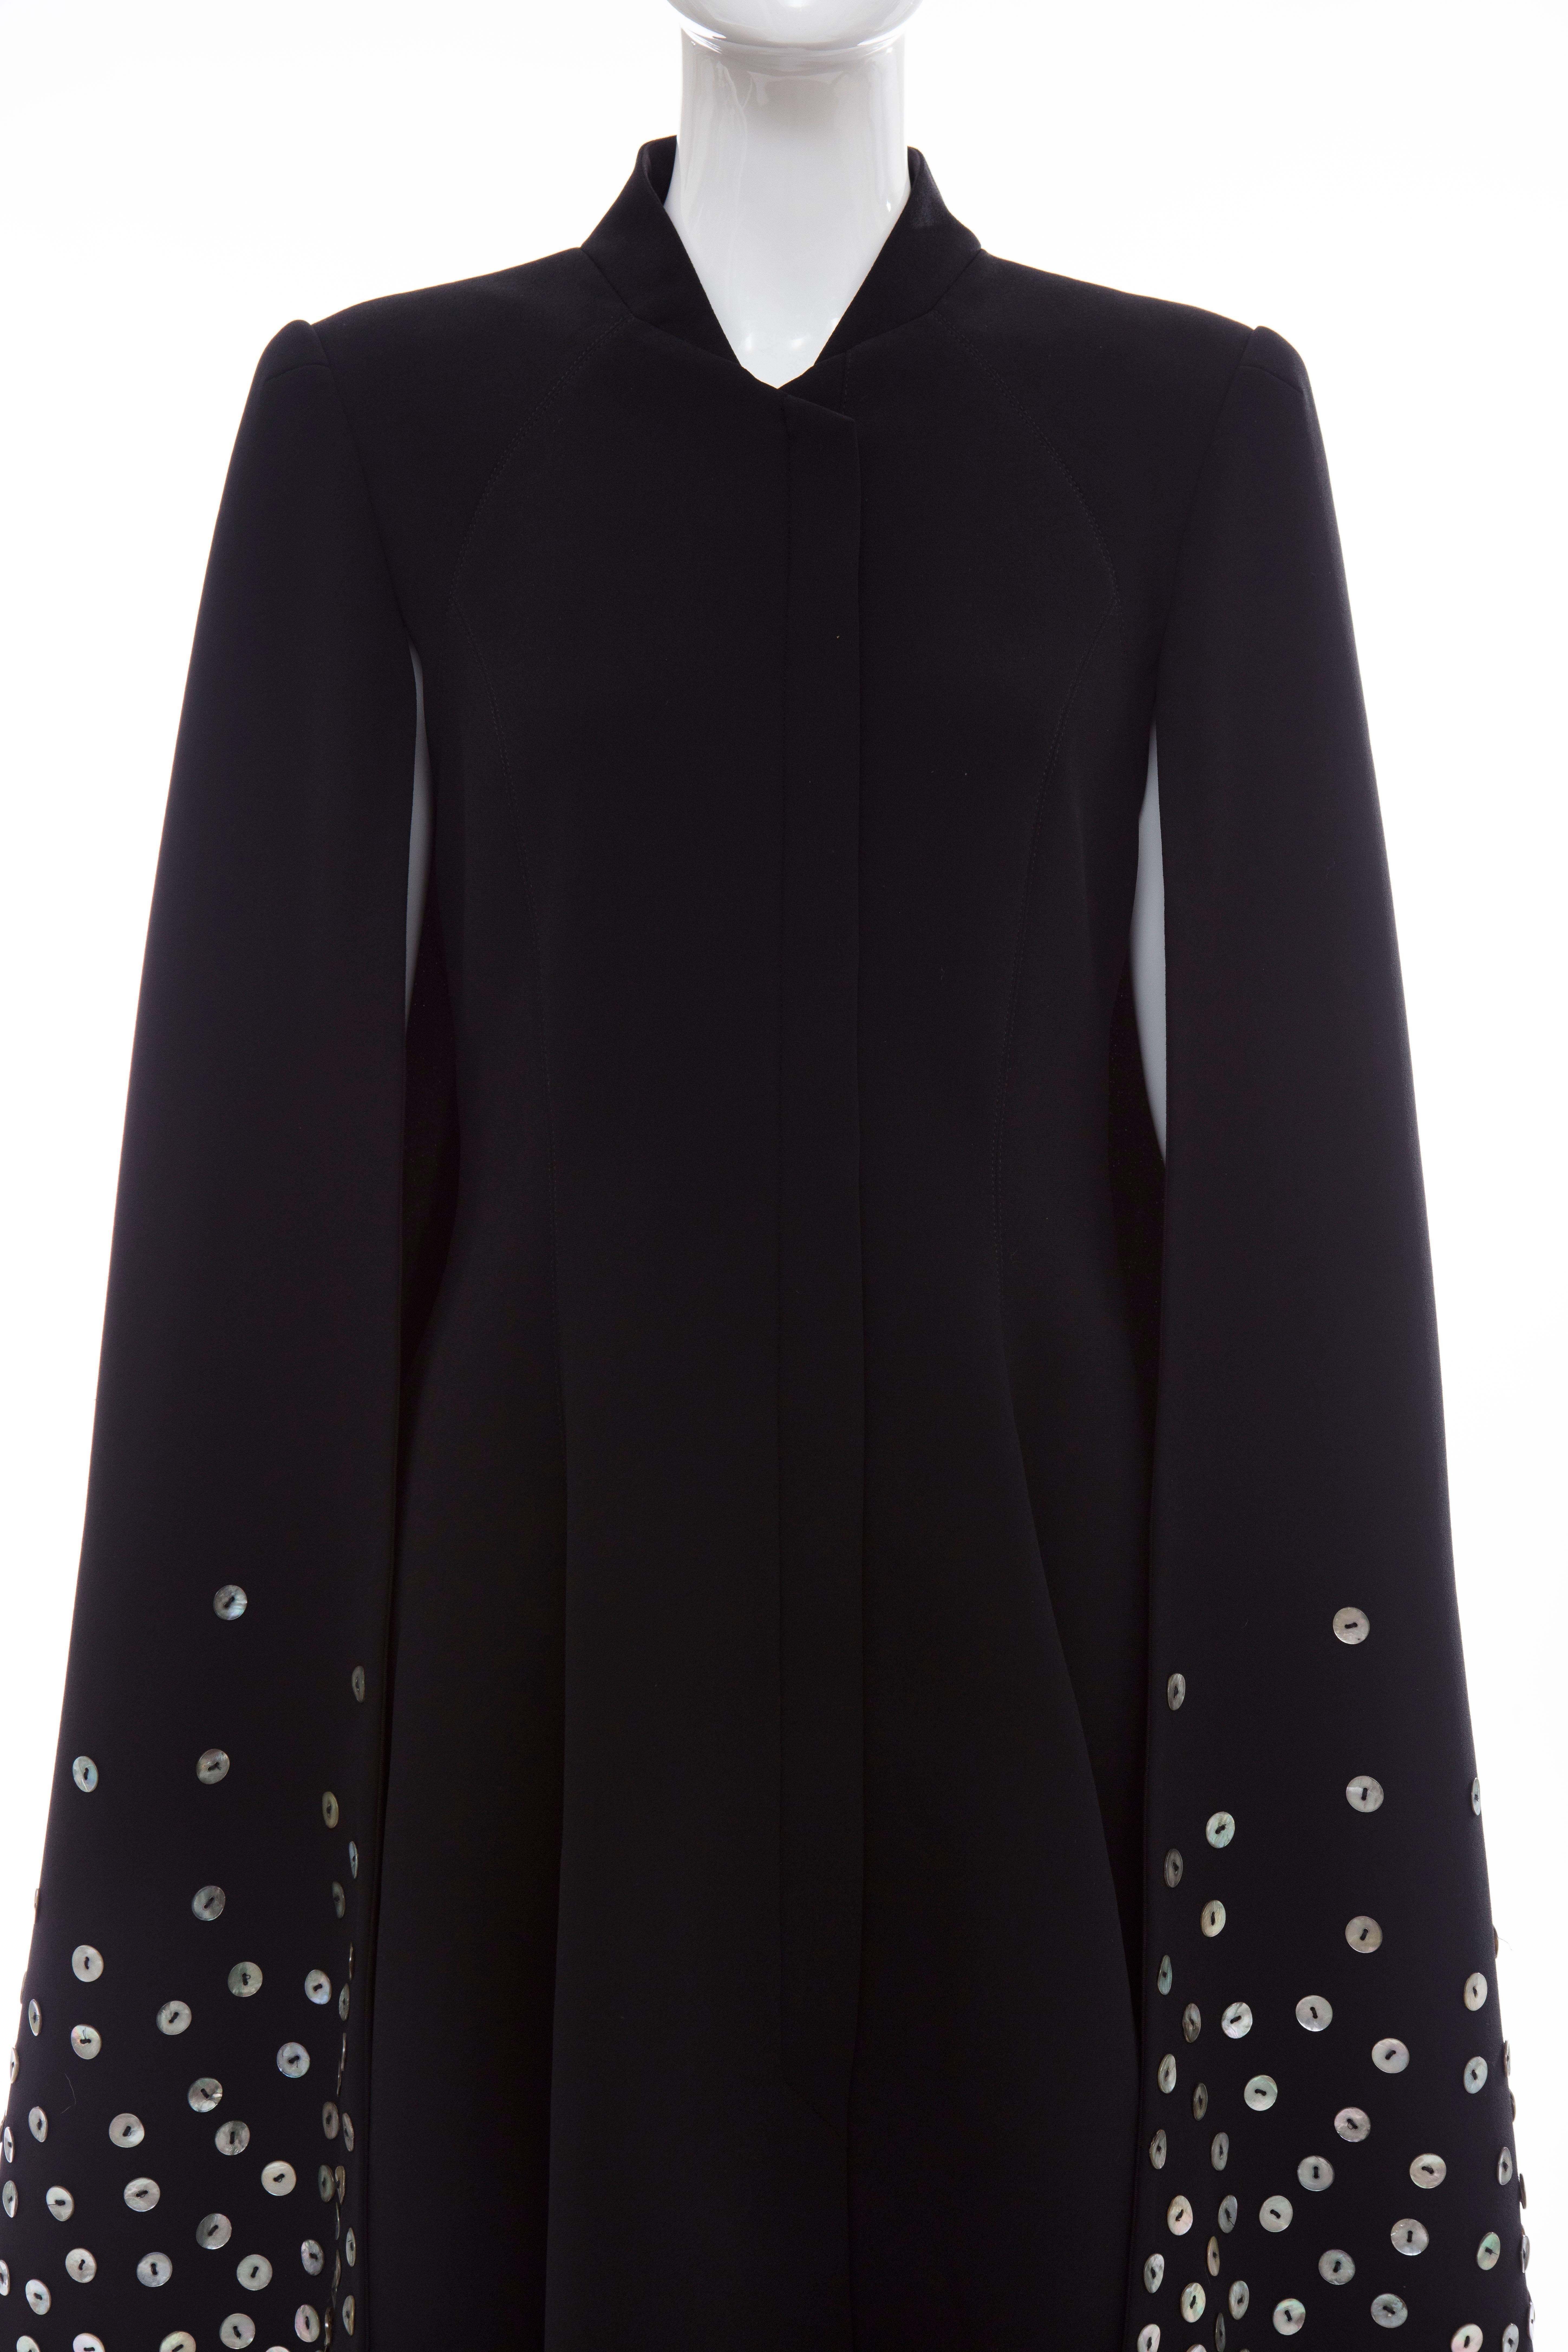 Gareth Pugh Zip Front Black Dress With Mother of Pearl Cape, Spring 2015 For Sale 1